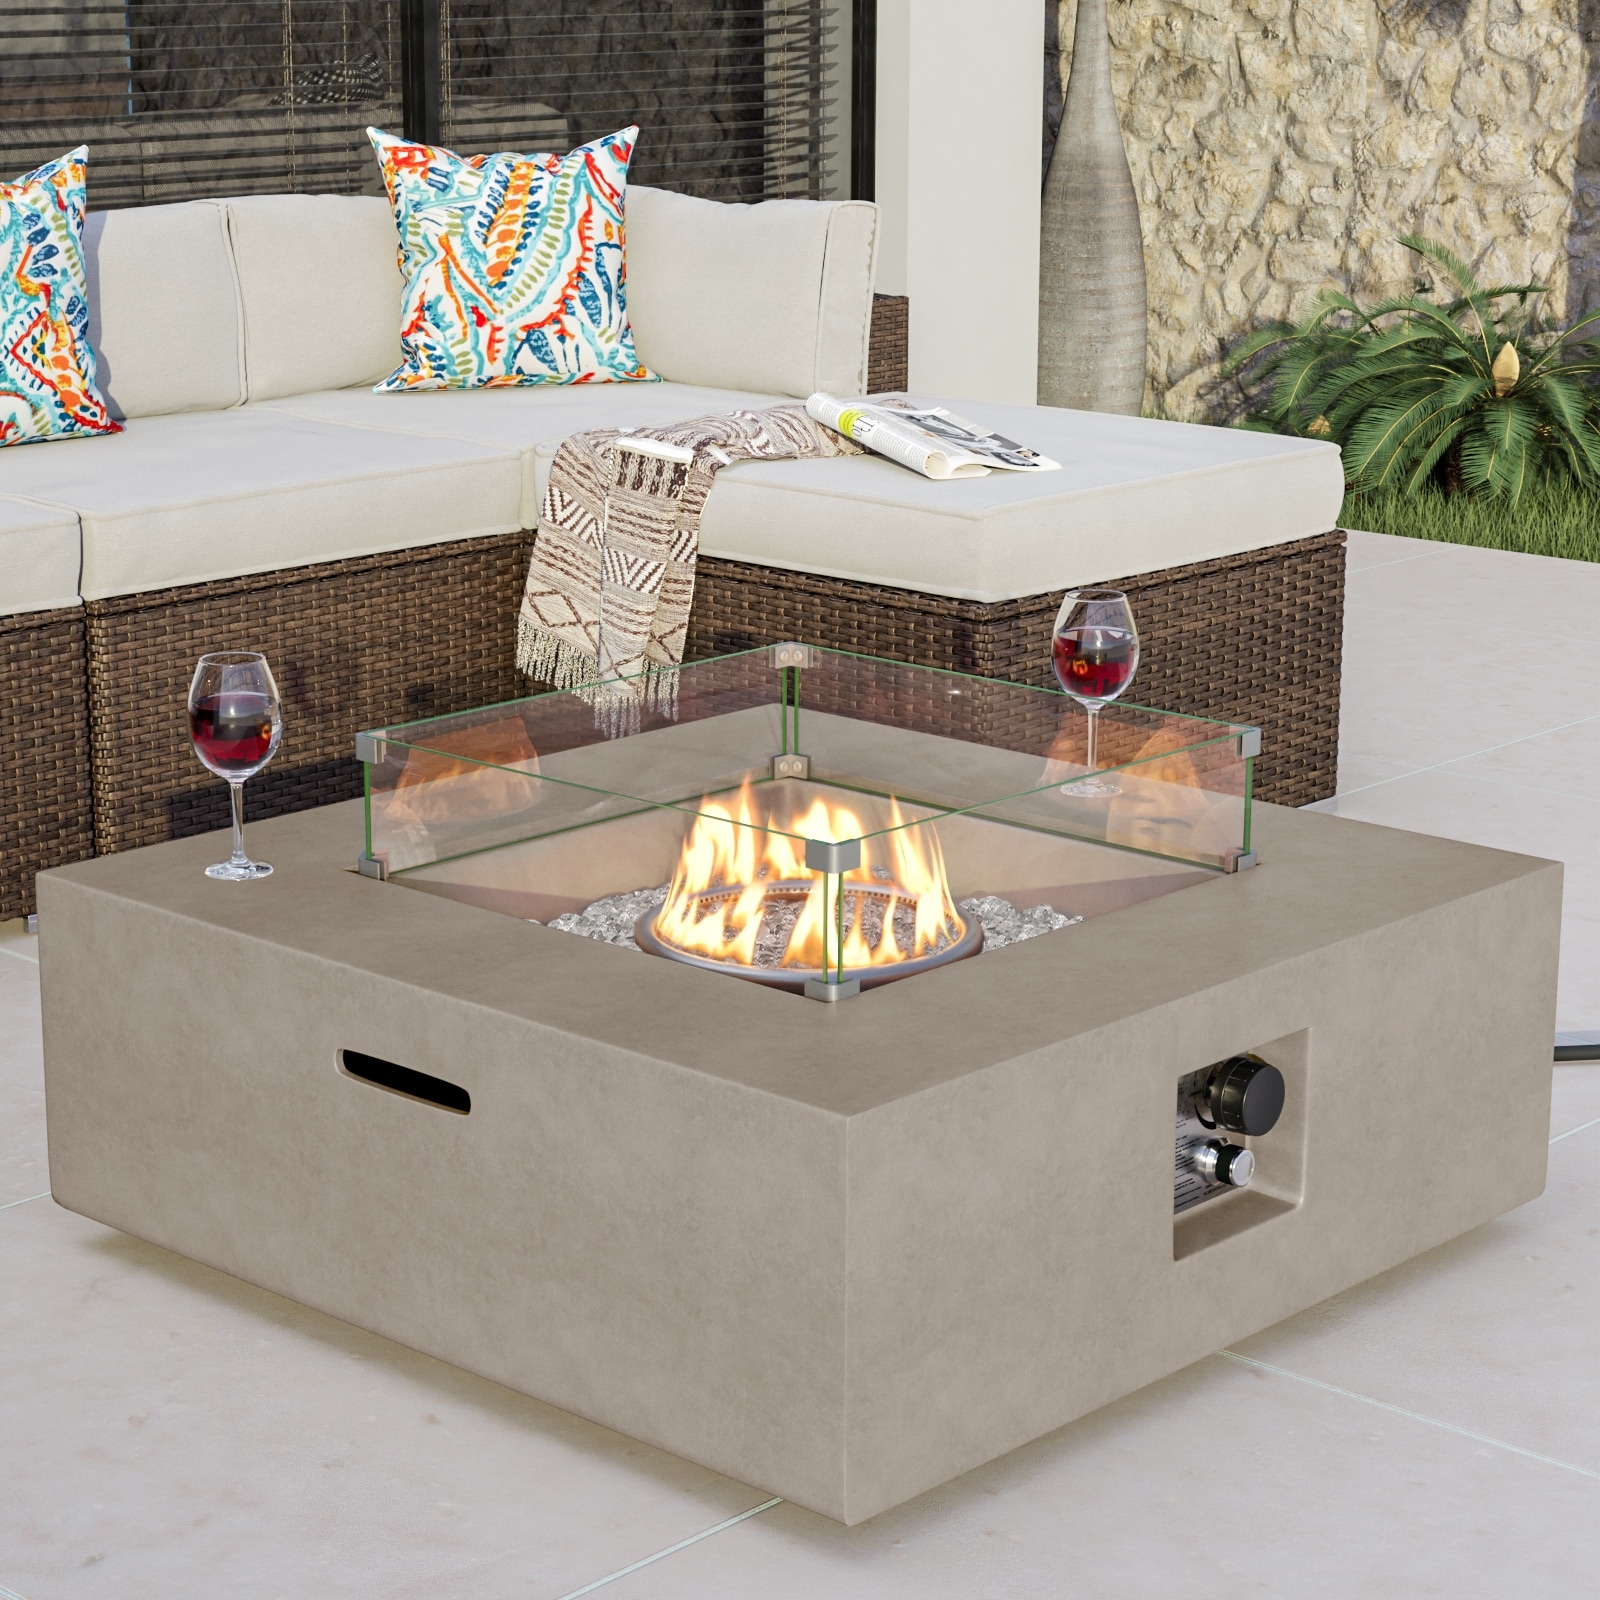 COSIEST Outdoor Square Fire Pit Table w Wind Glass, Fire Glass